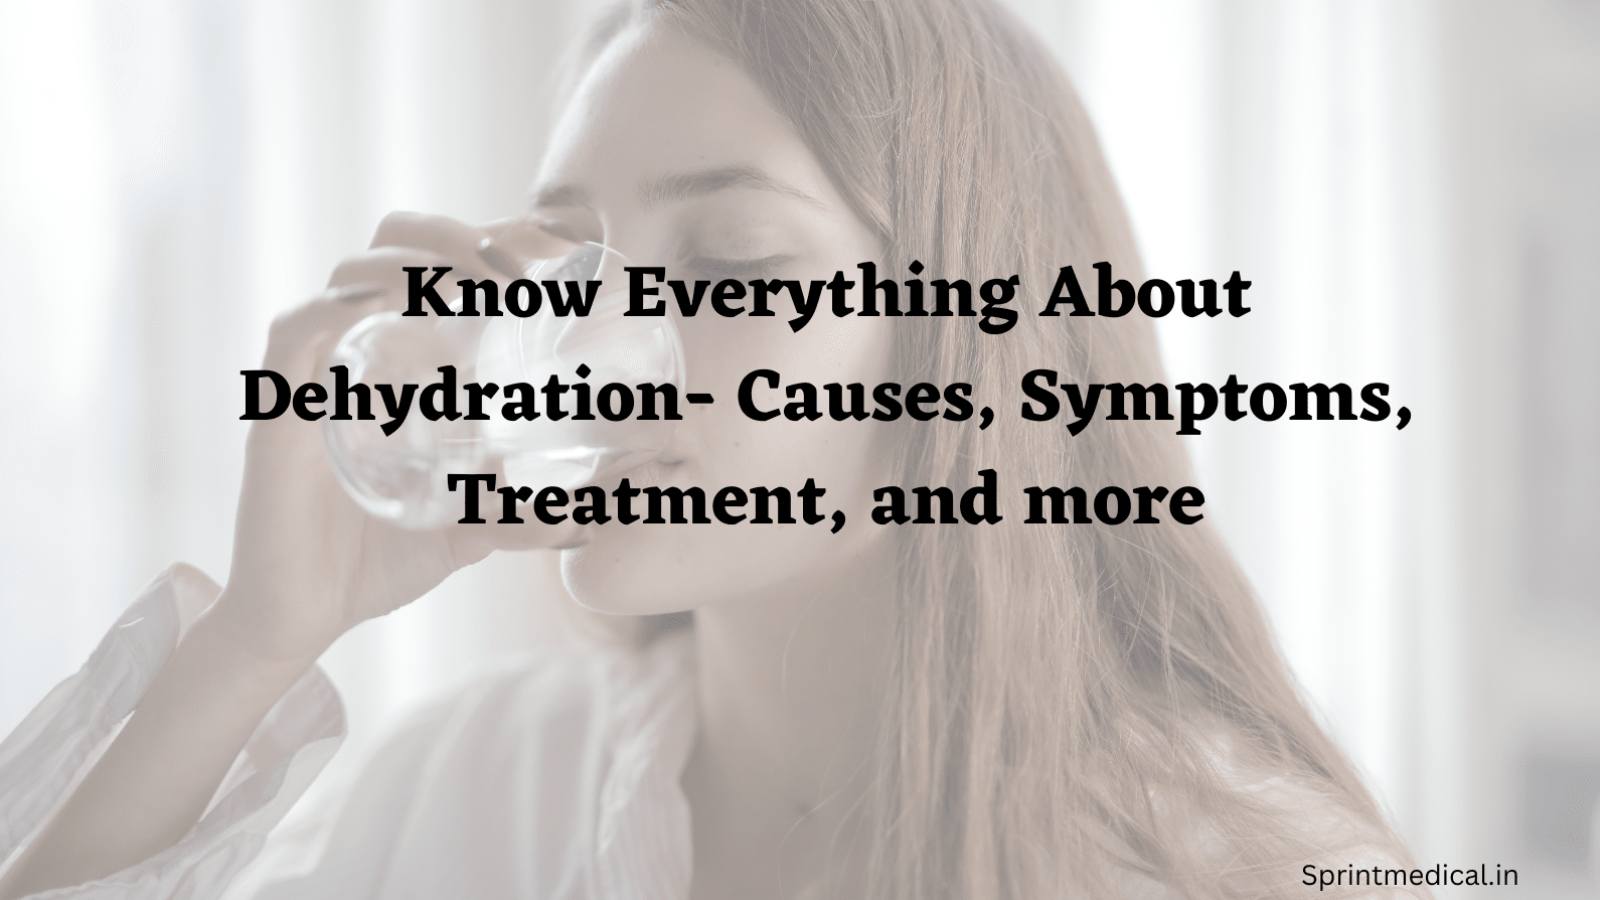 Know Everything About Dehydration - Causes, Symptoms,Treatment and more